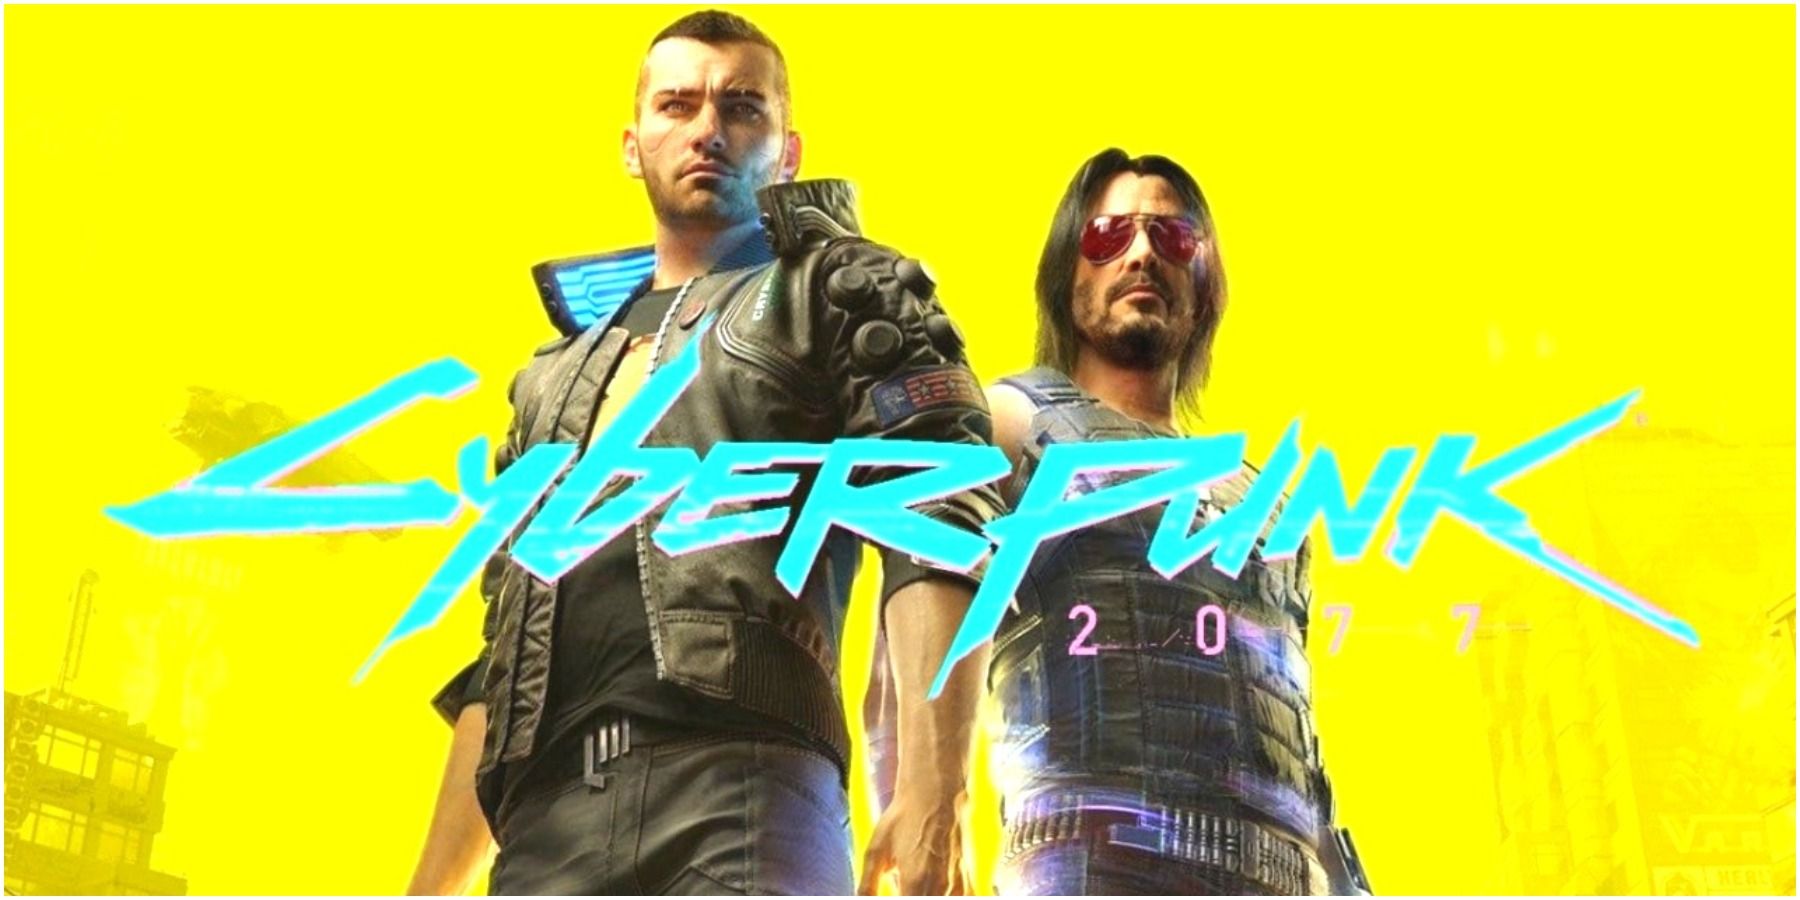 Cyberpunk 2077, possibly the biggest flop announced at E3 in its history